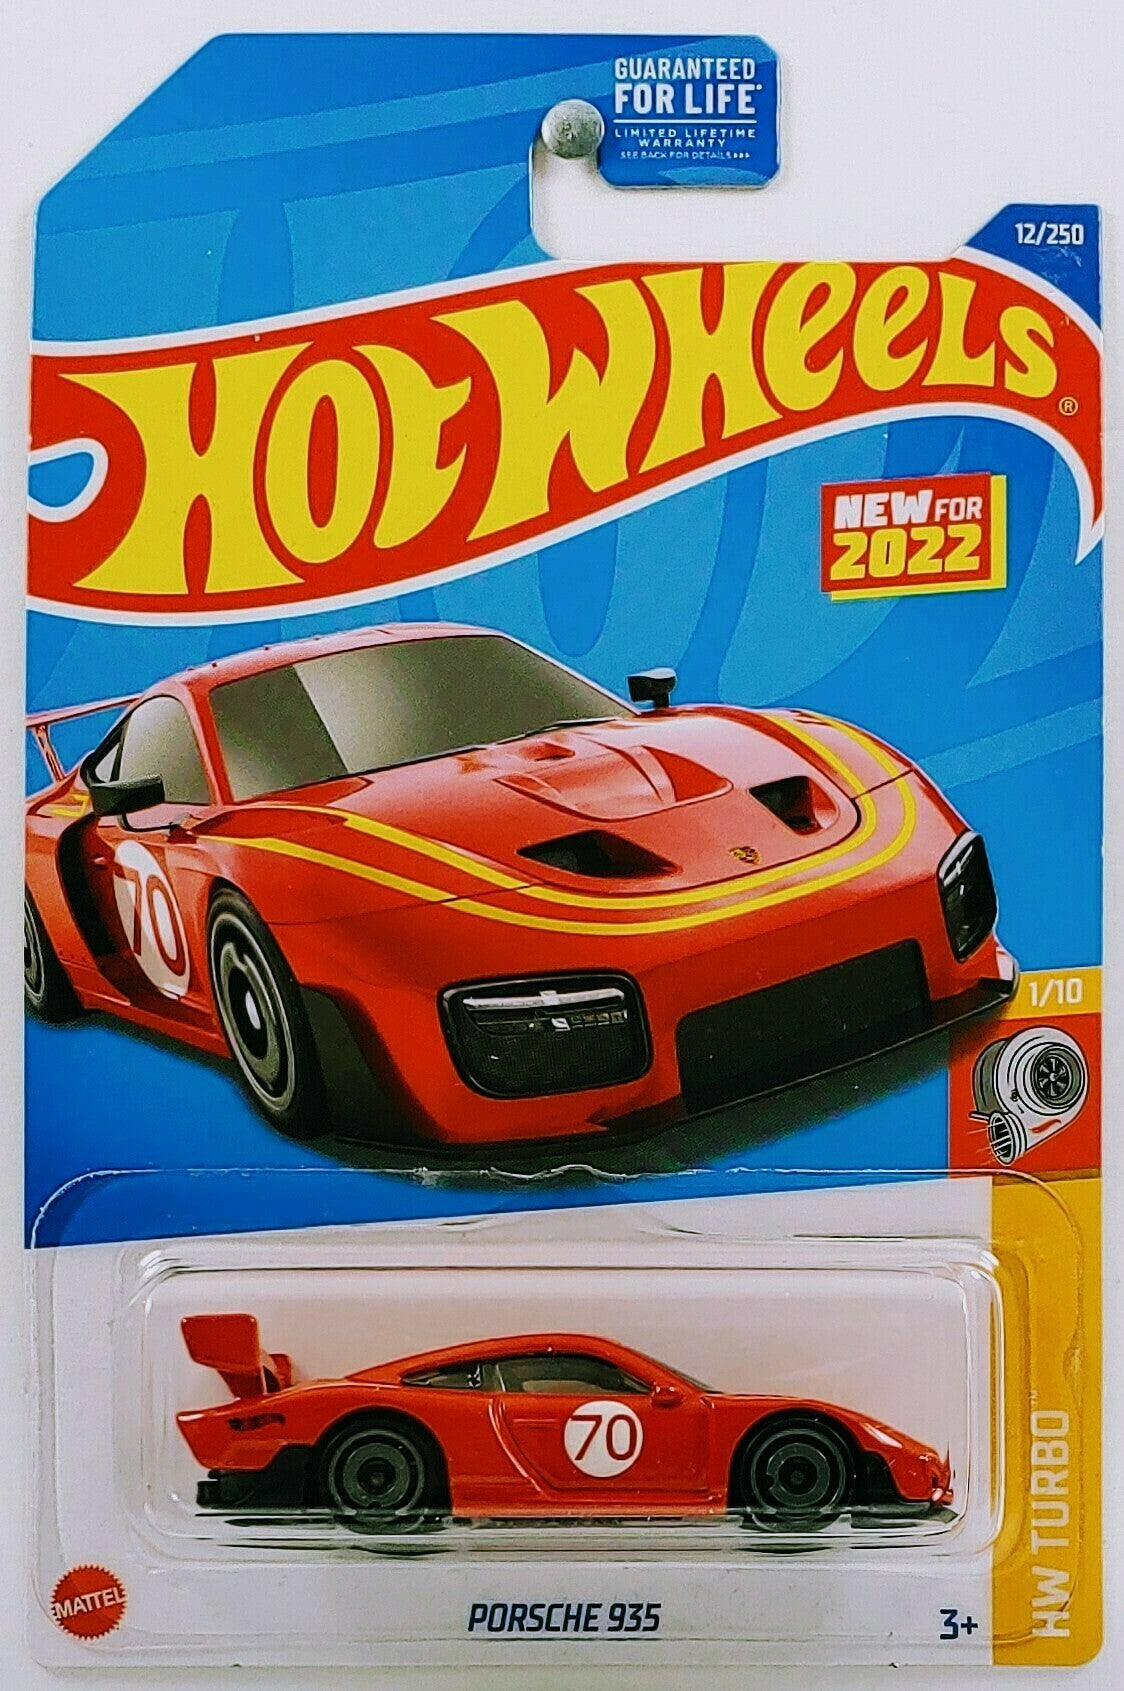 Hot Wheels 2022 - Collector # 012/250 - HW Turbo 1/10 - New Models - Porsche 935 - Red - USA